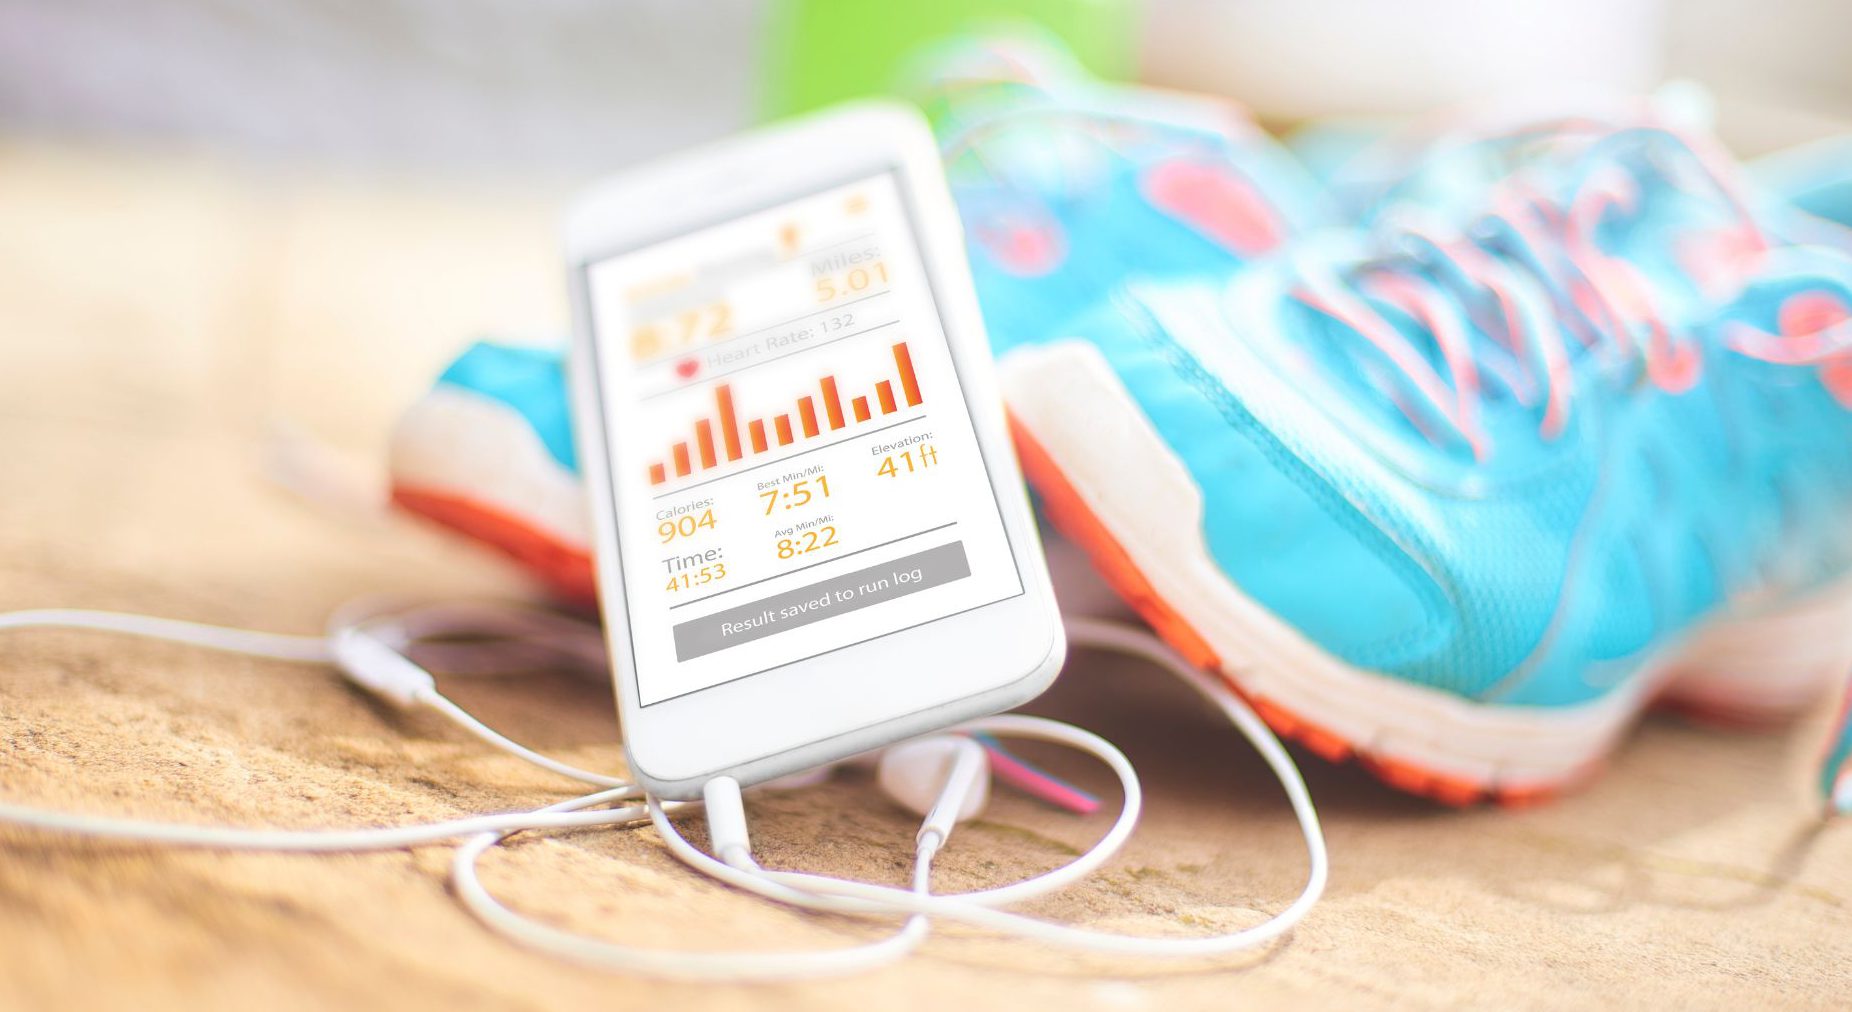 Global Fitness App Market Growth Analysis And Indications – Includes Fitness App Market Size